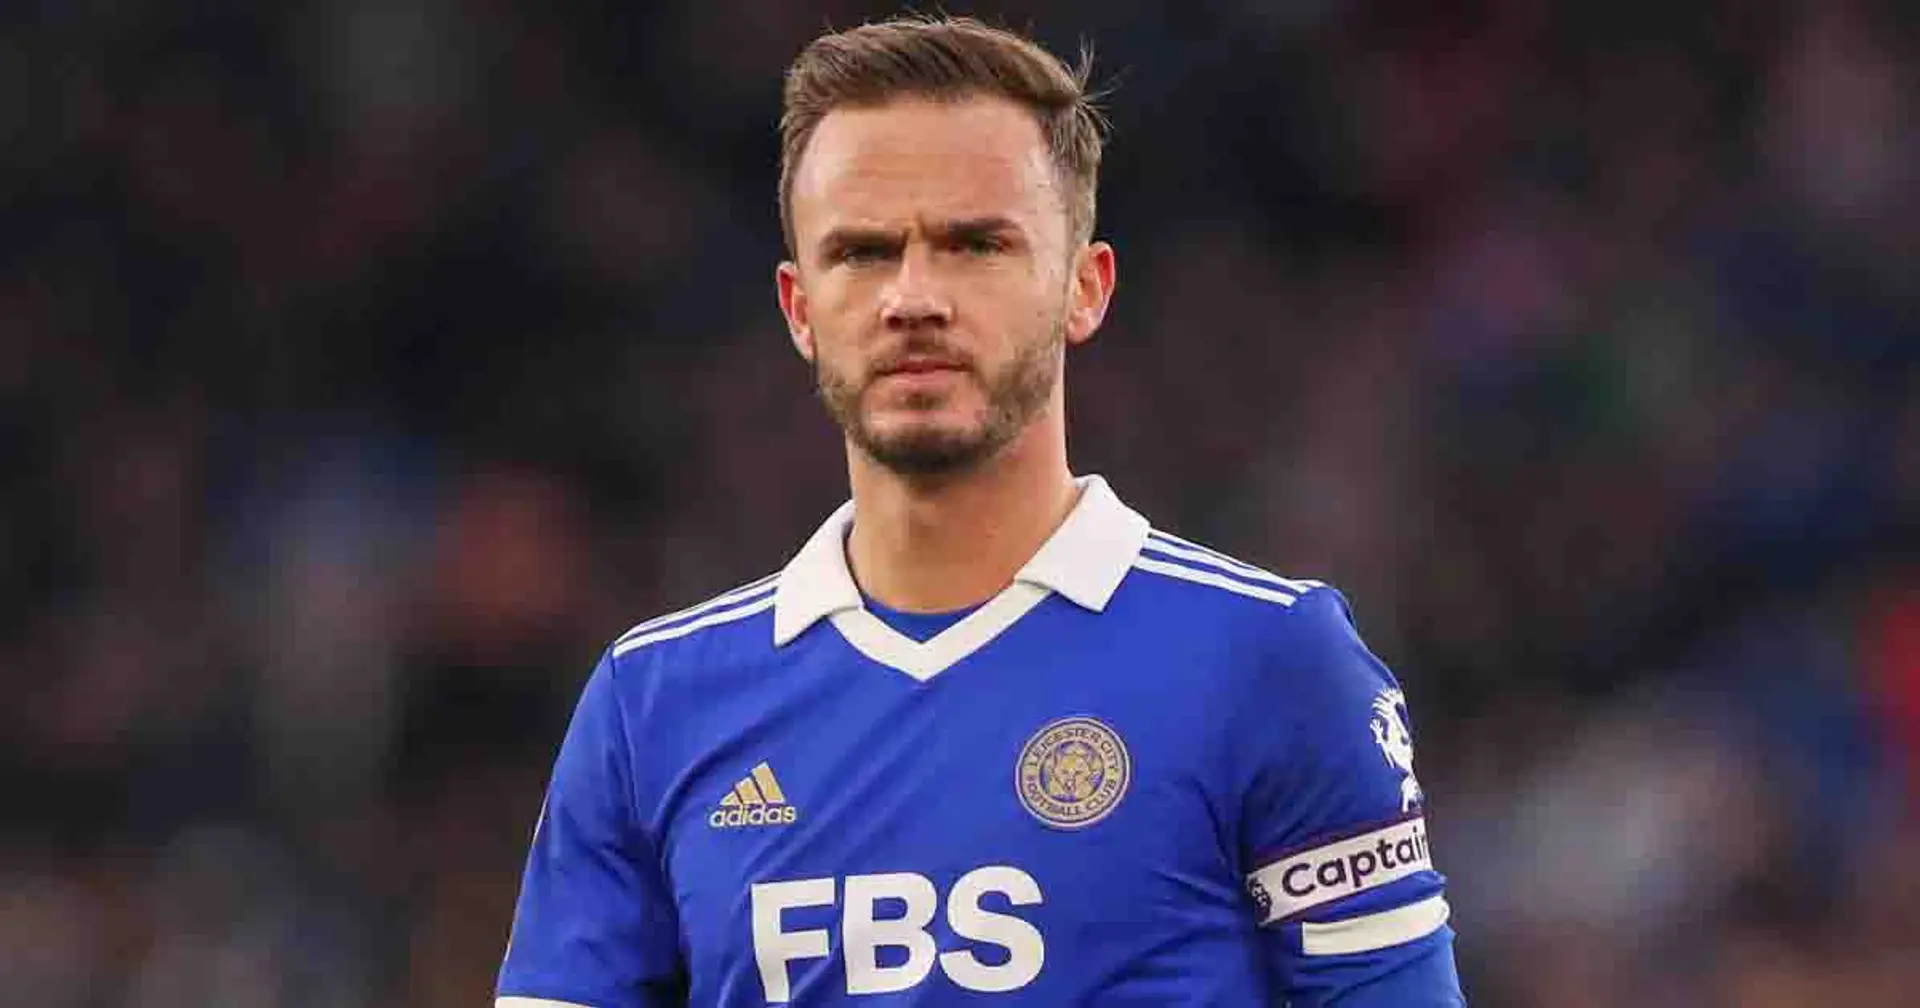 Man United interested in summer move for relegation-bound James Maddison, price revealed (reliability: 4 stars)